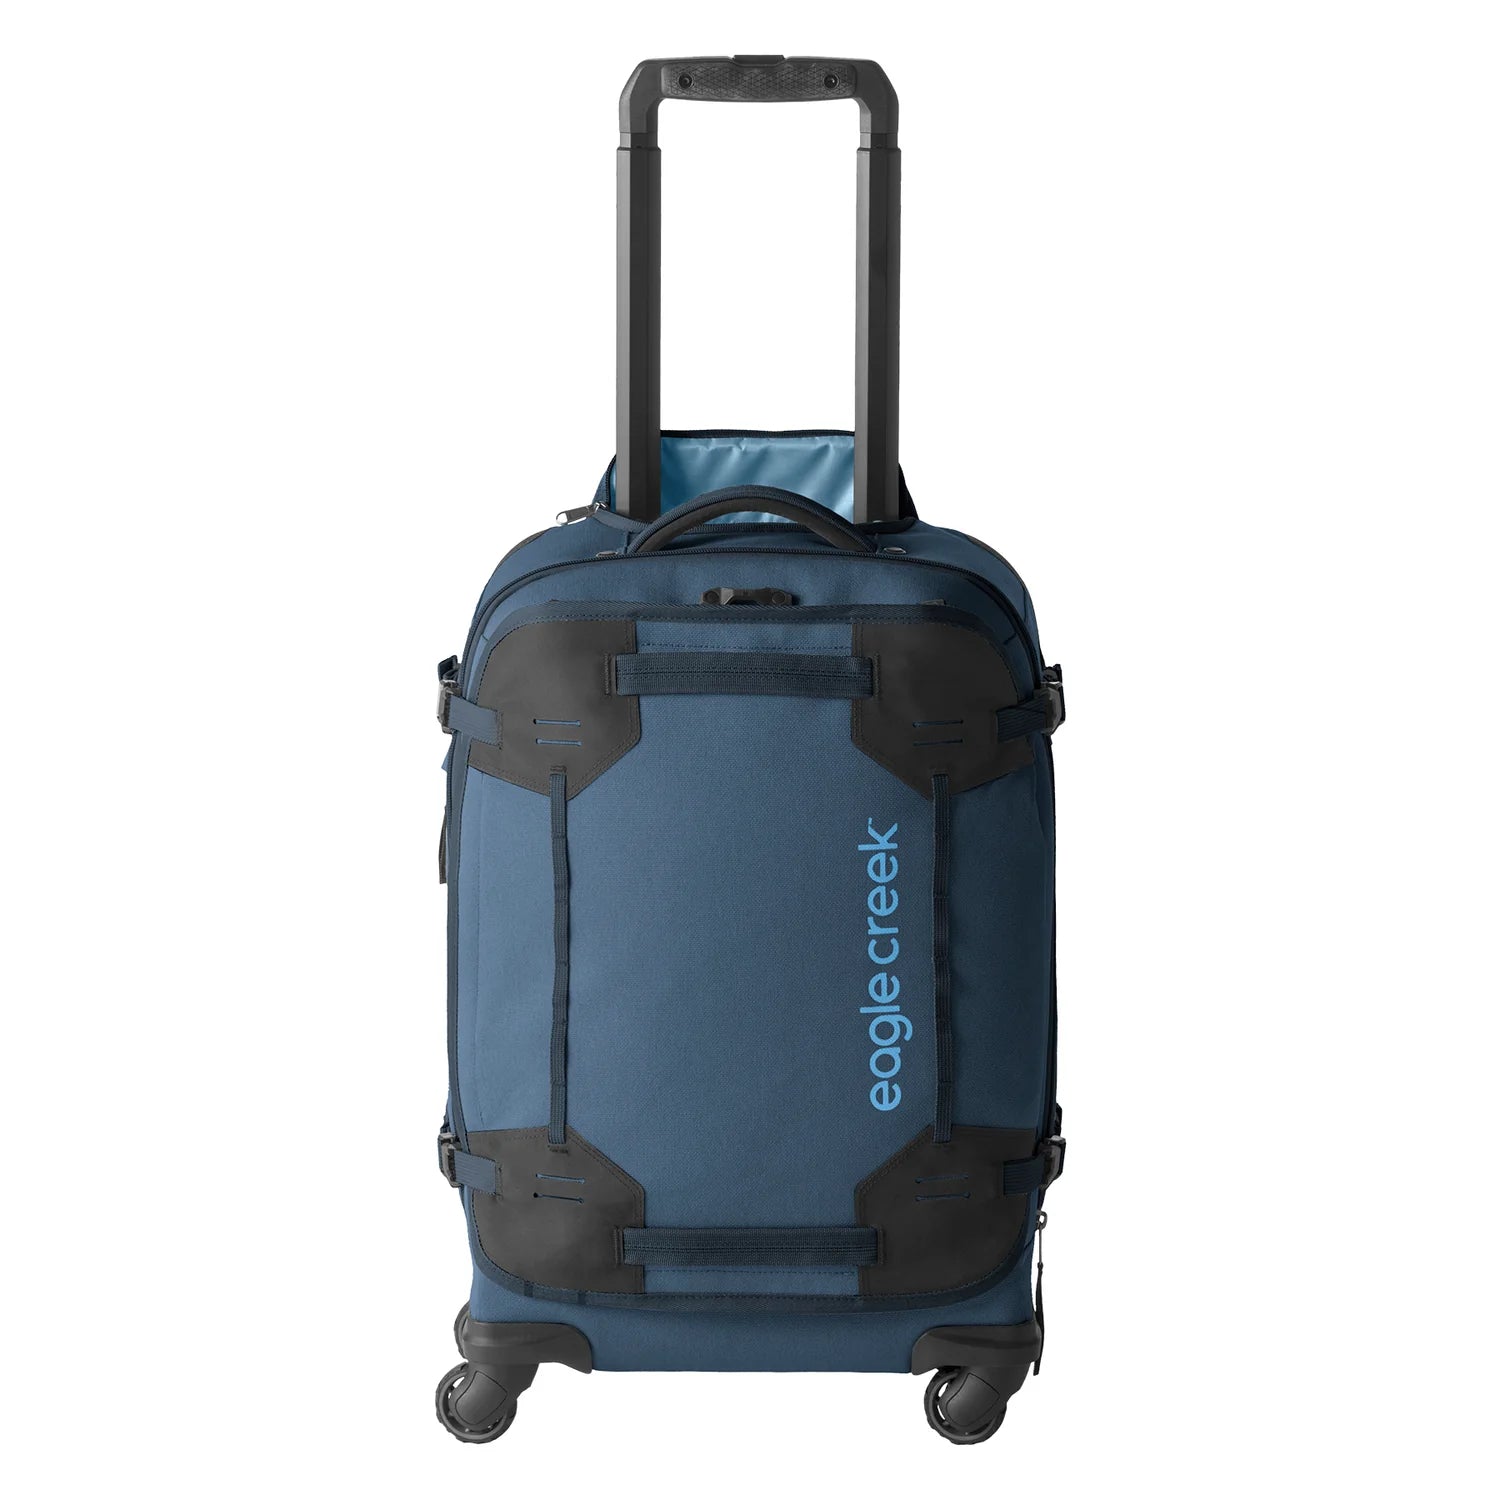 GEAR WARRIOR XE 4-WHEEL CARRY-ON LUGGAGE